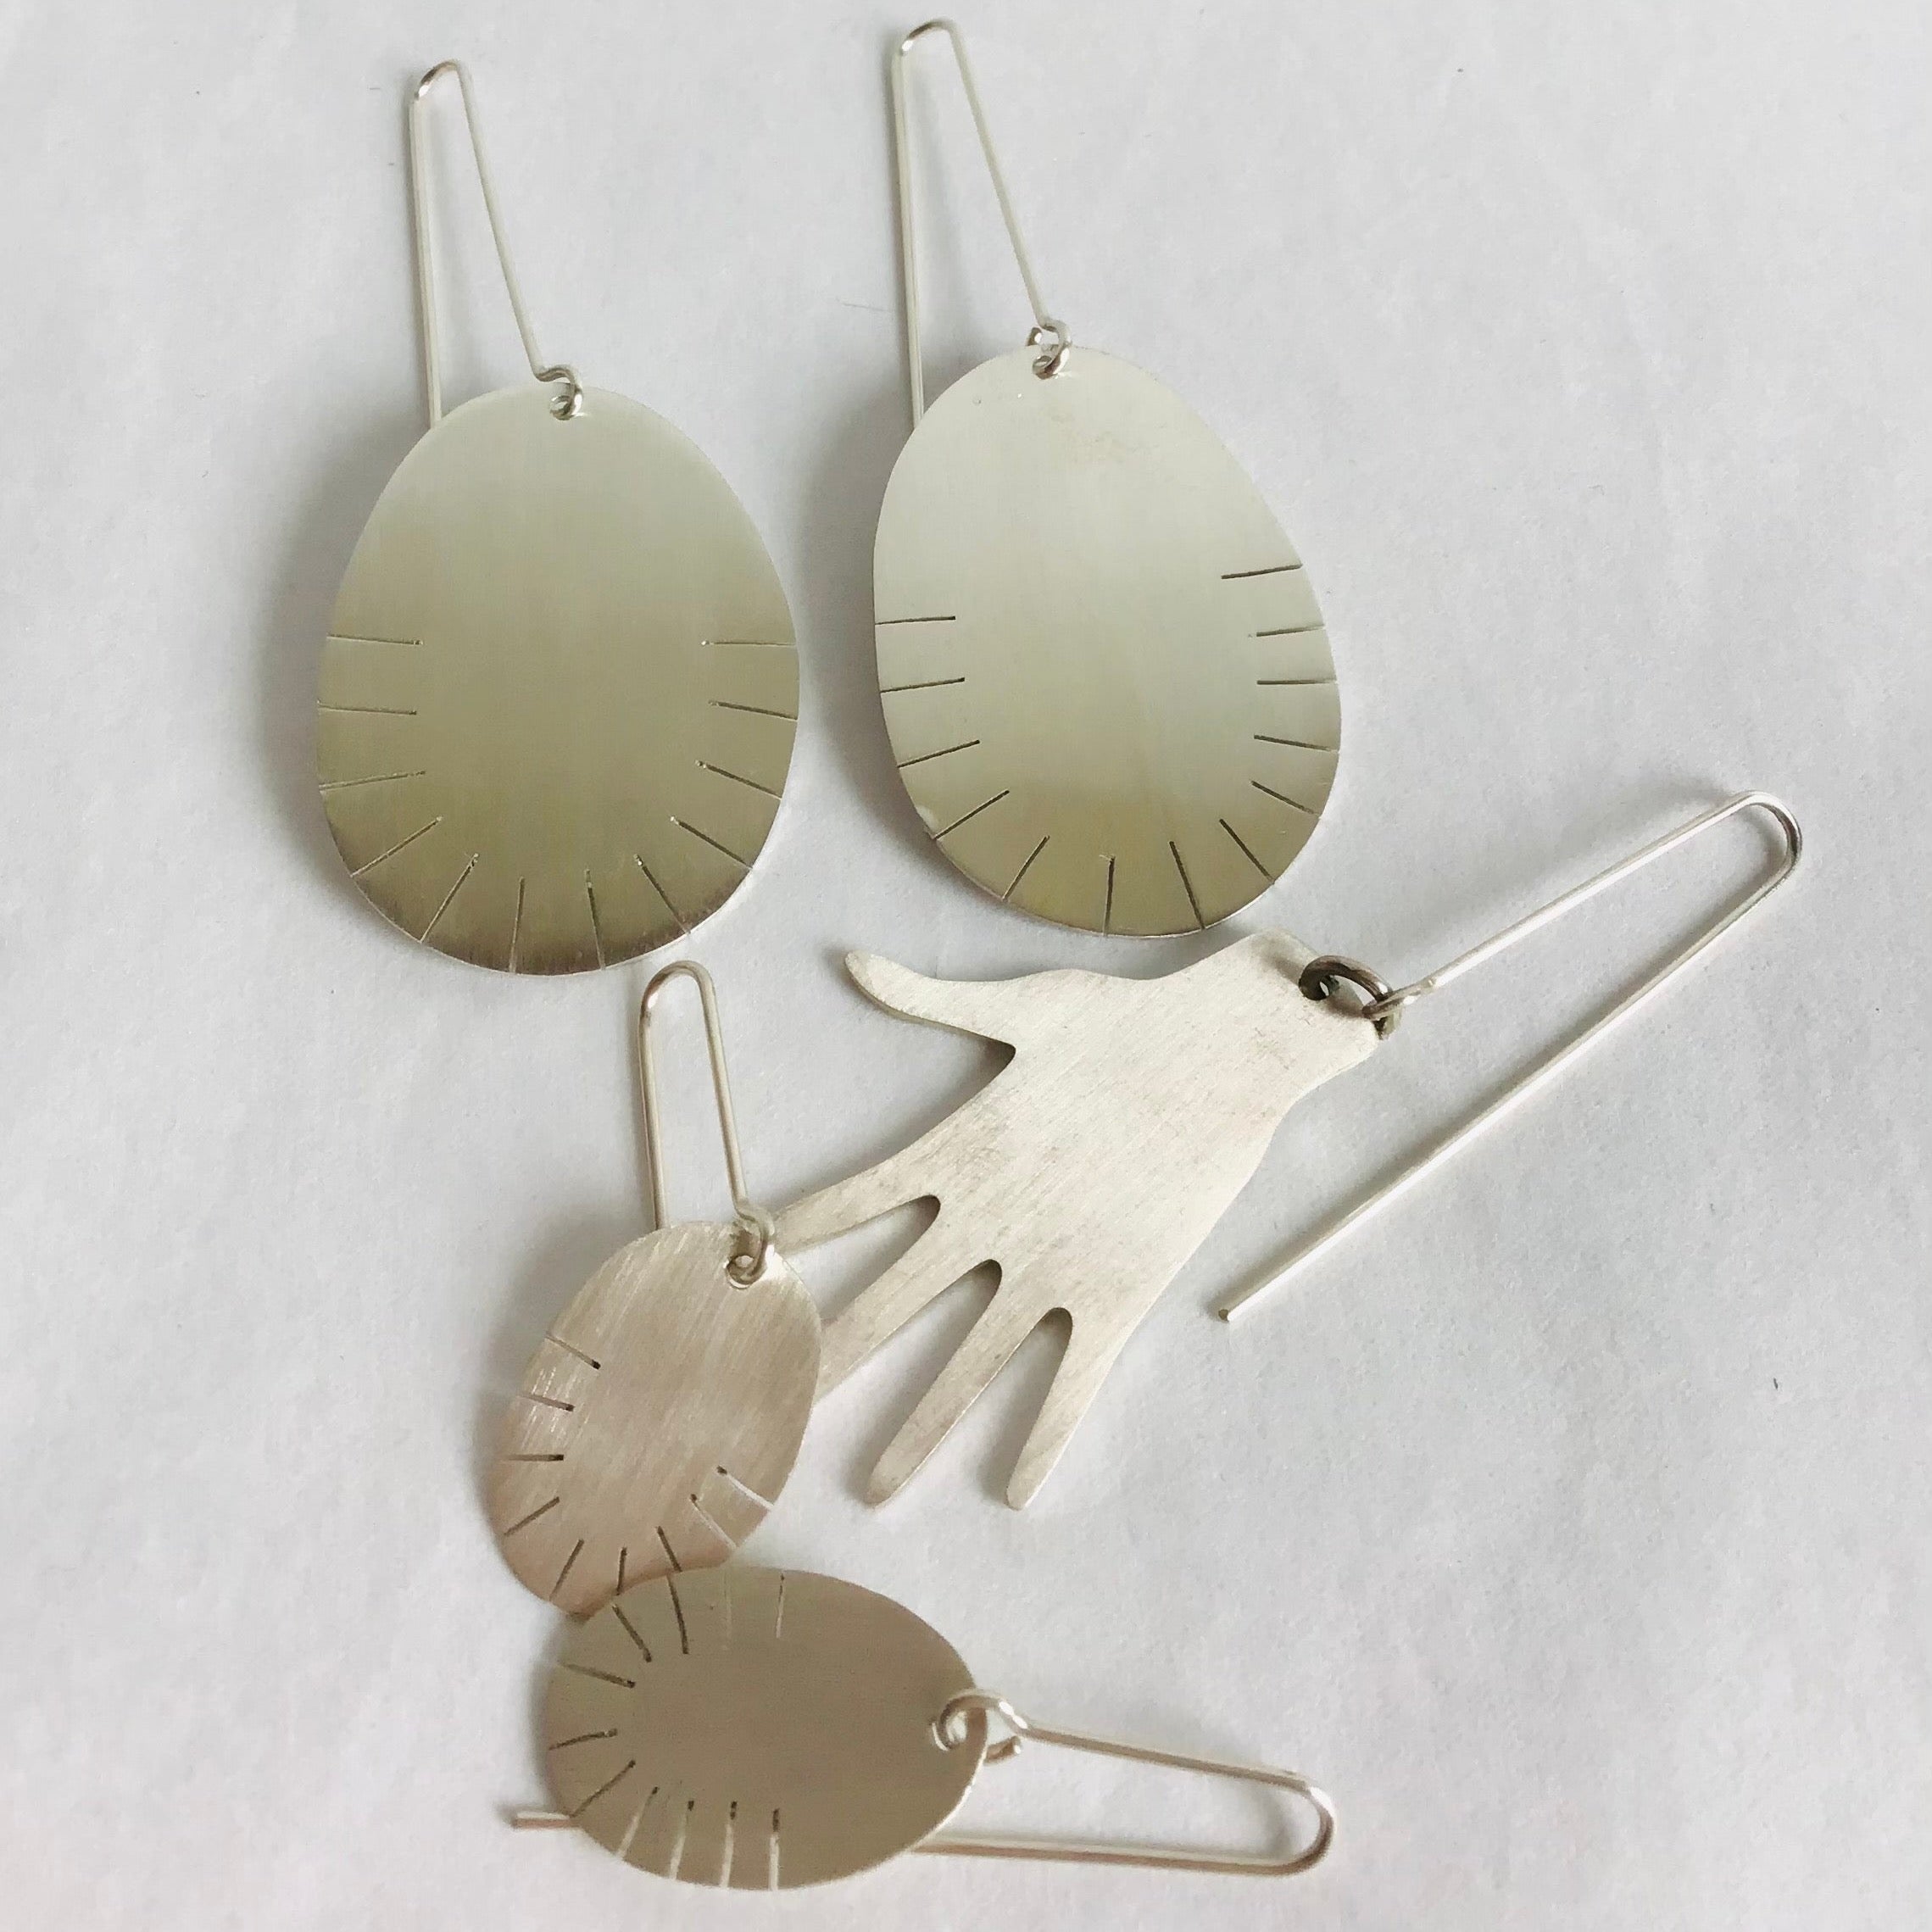 Collection of silver earrings, two oval pairs, and one pair hand-shaped